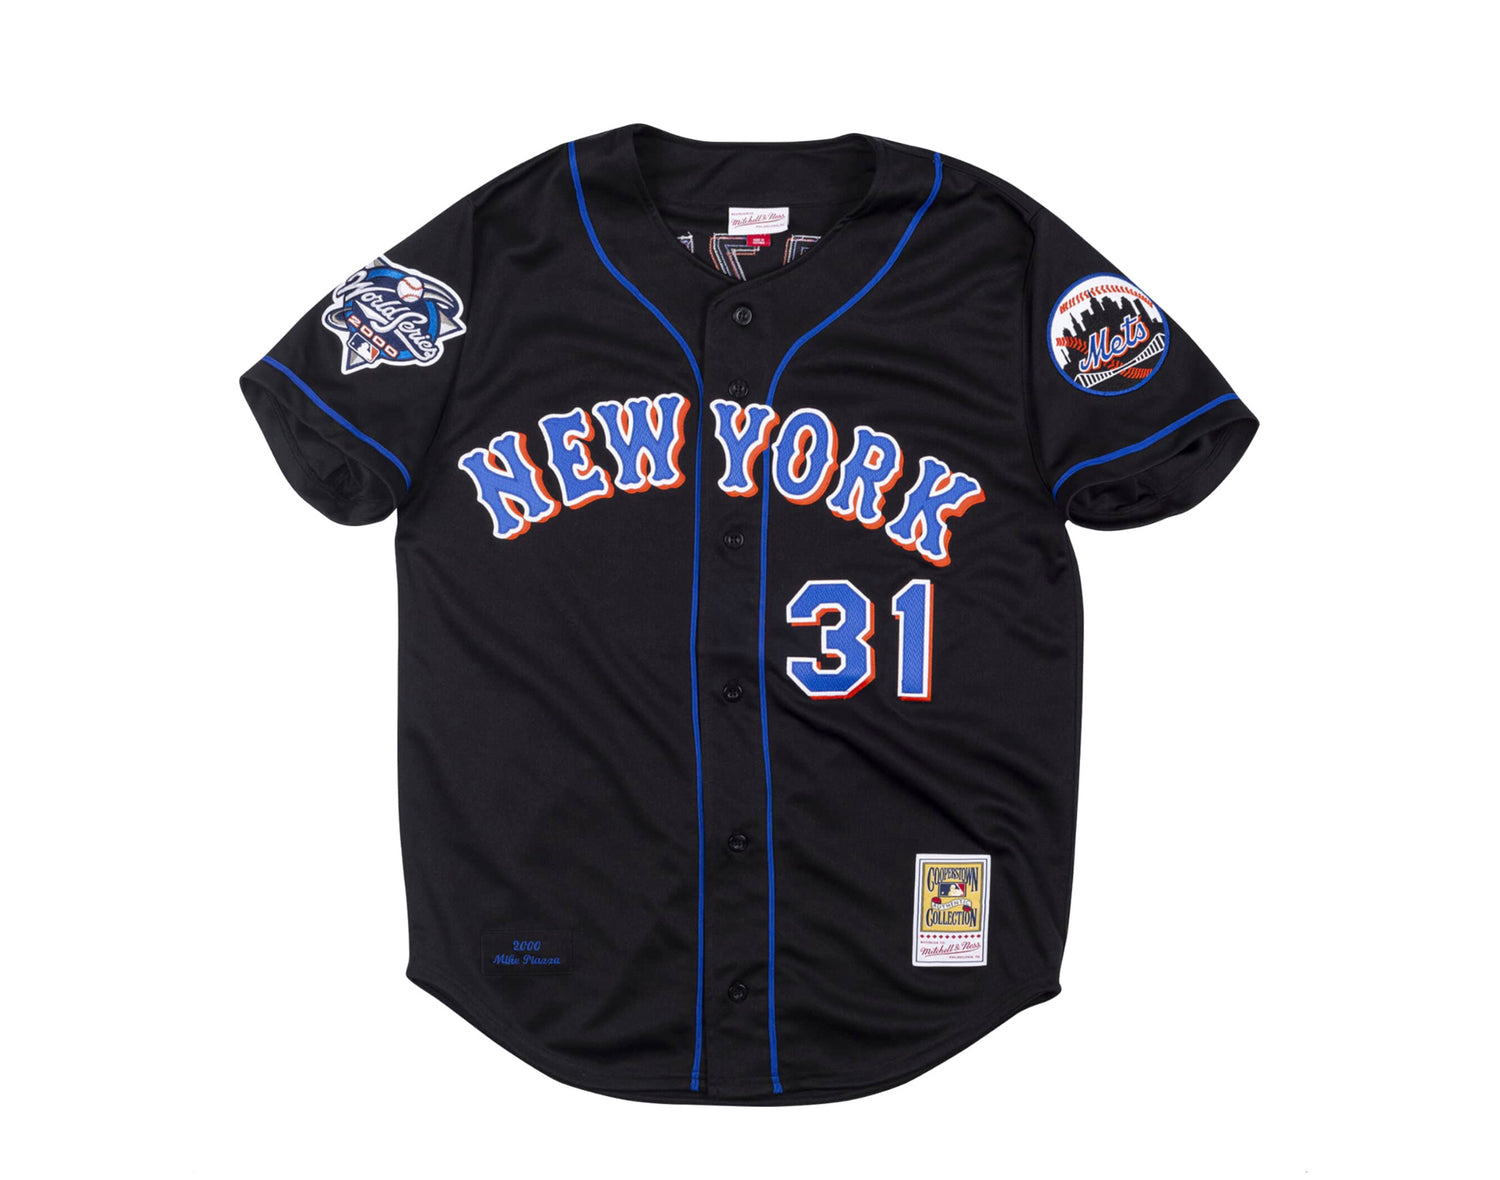 Mitchell & Ness Authentic New York Mets 2000 WS Mike Piazza Jersey